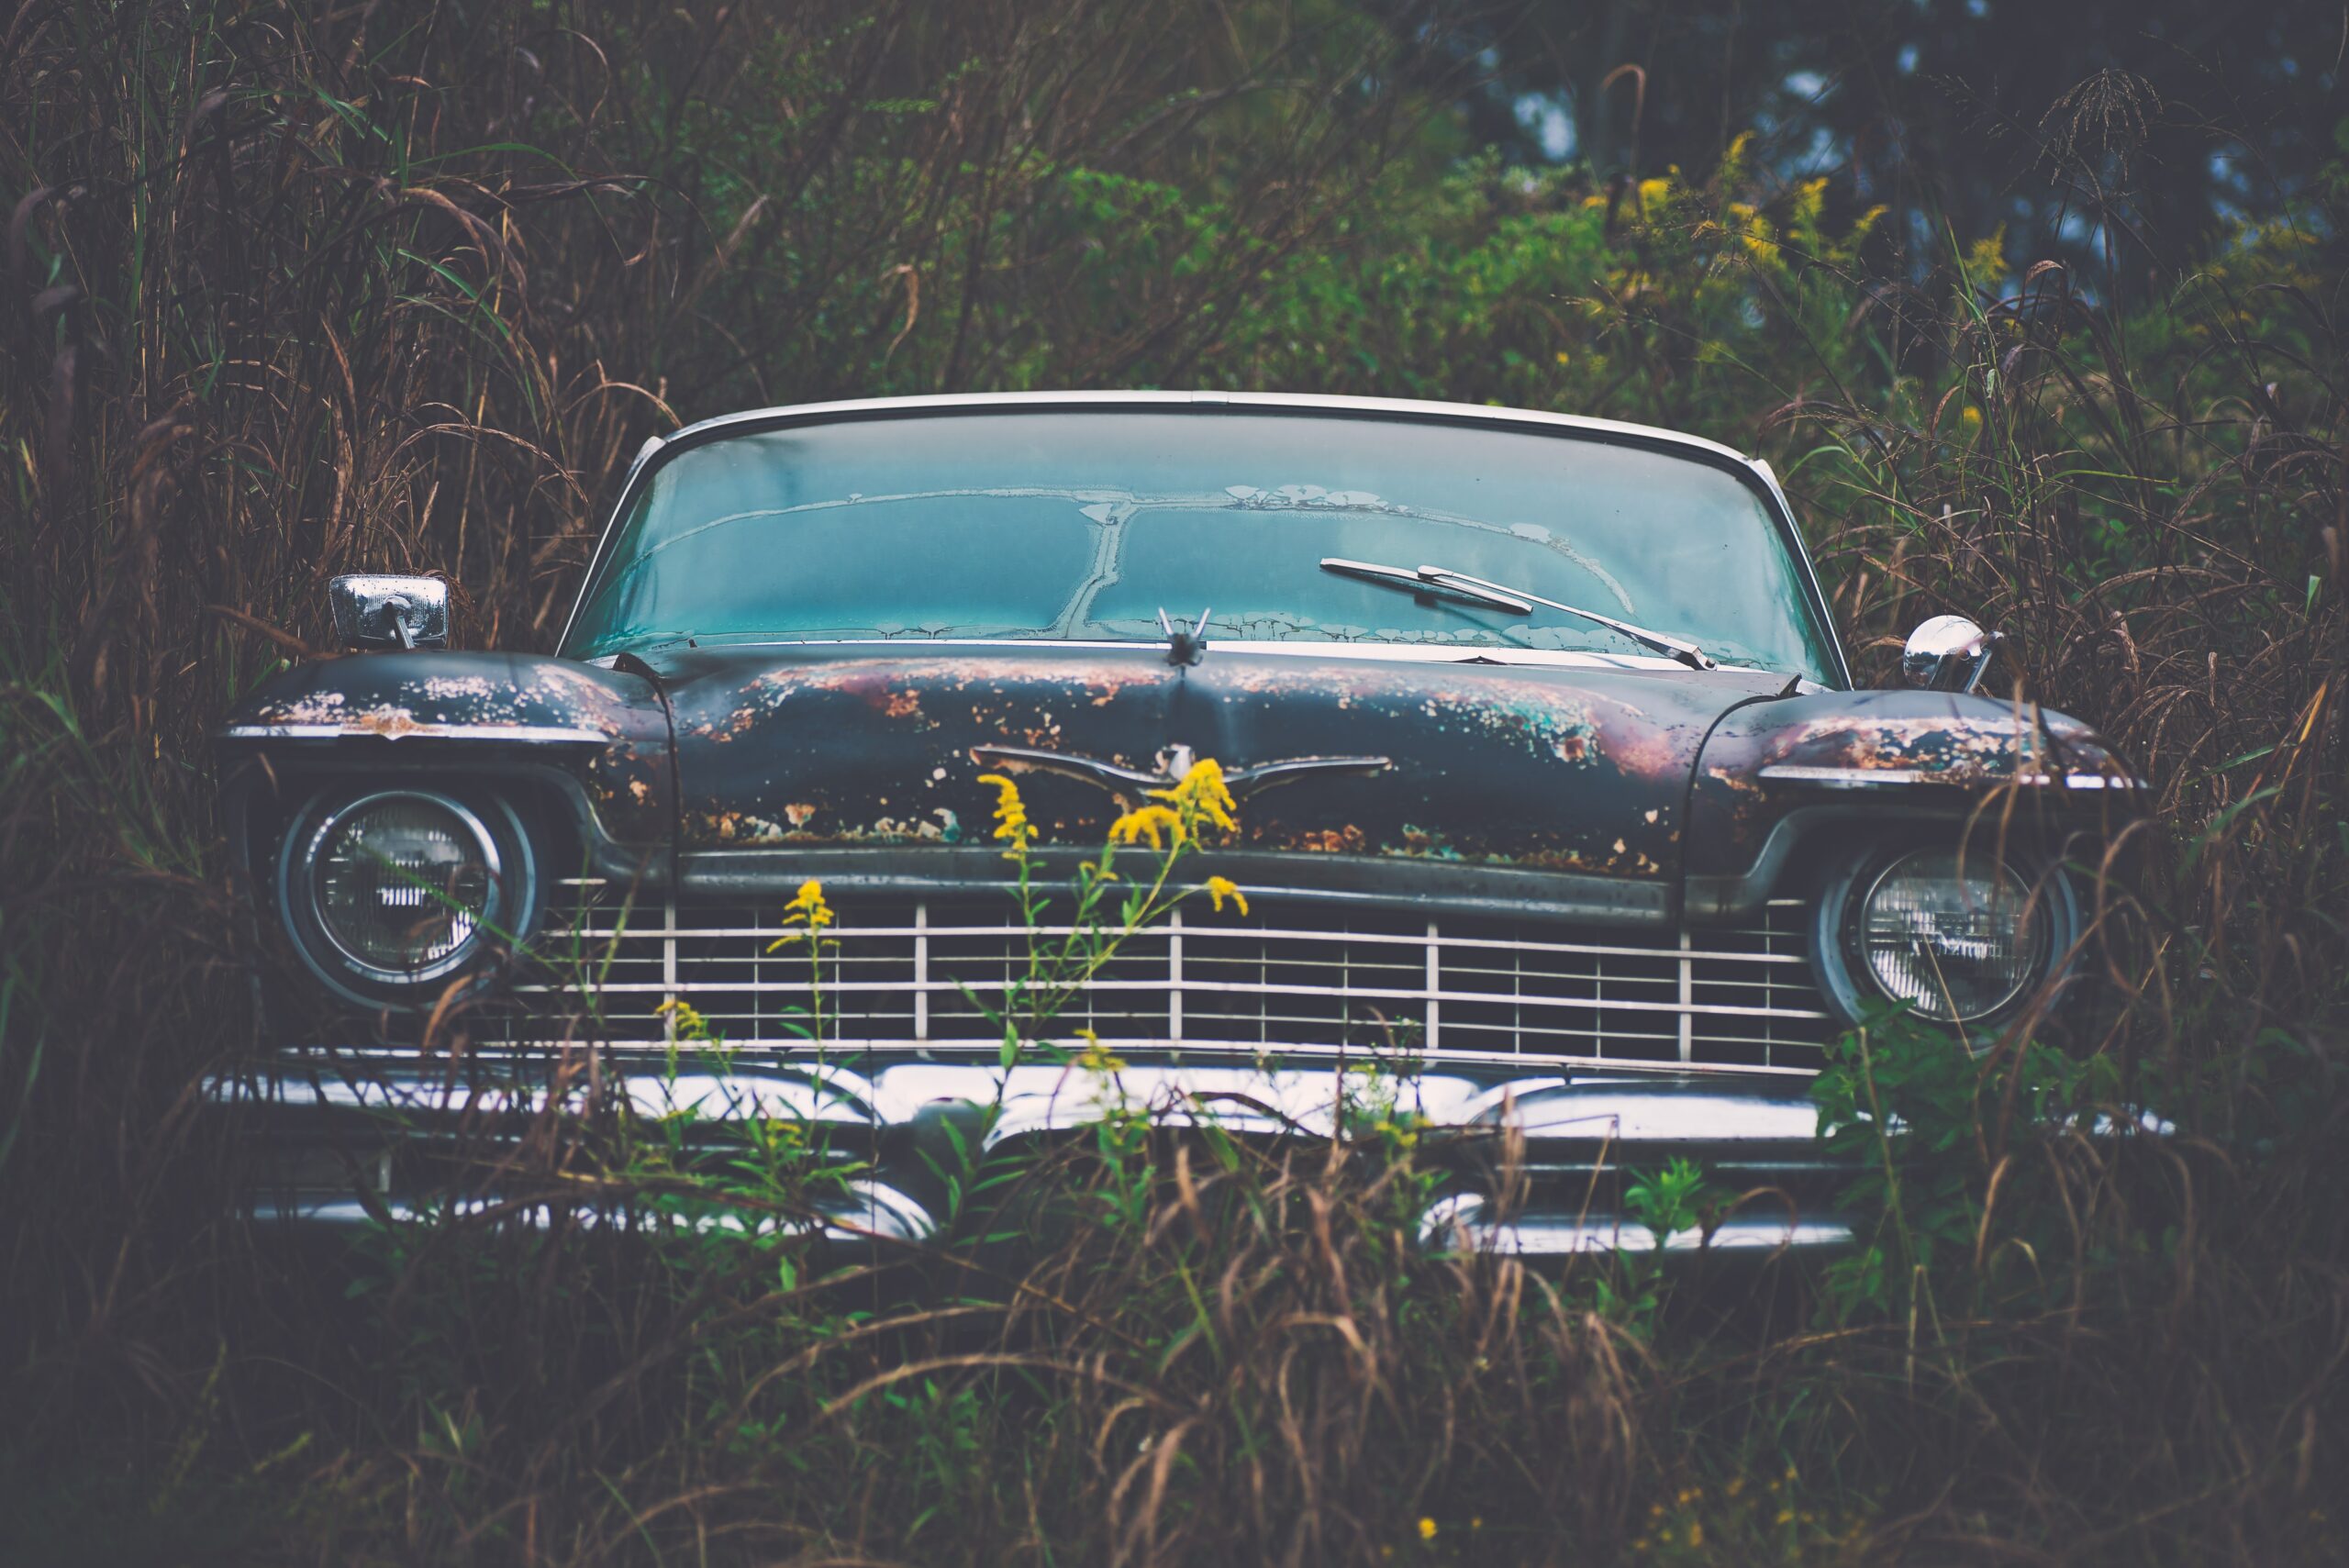 How to Get Rid of an Old Car in Sunshine